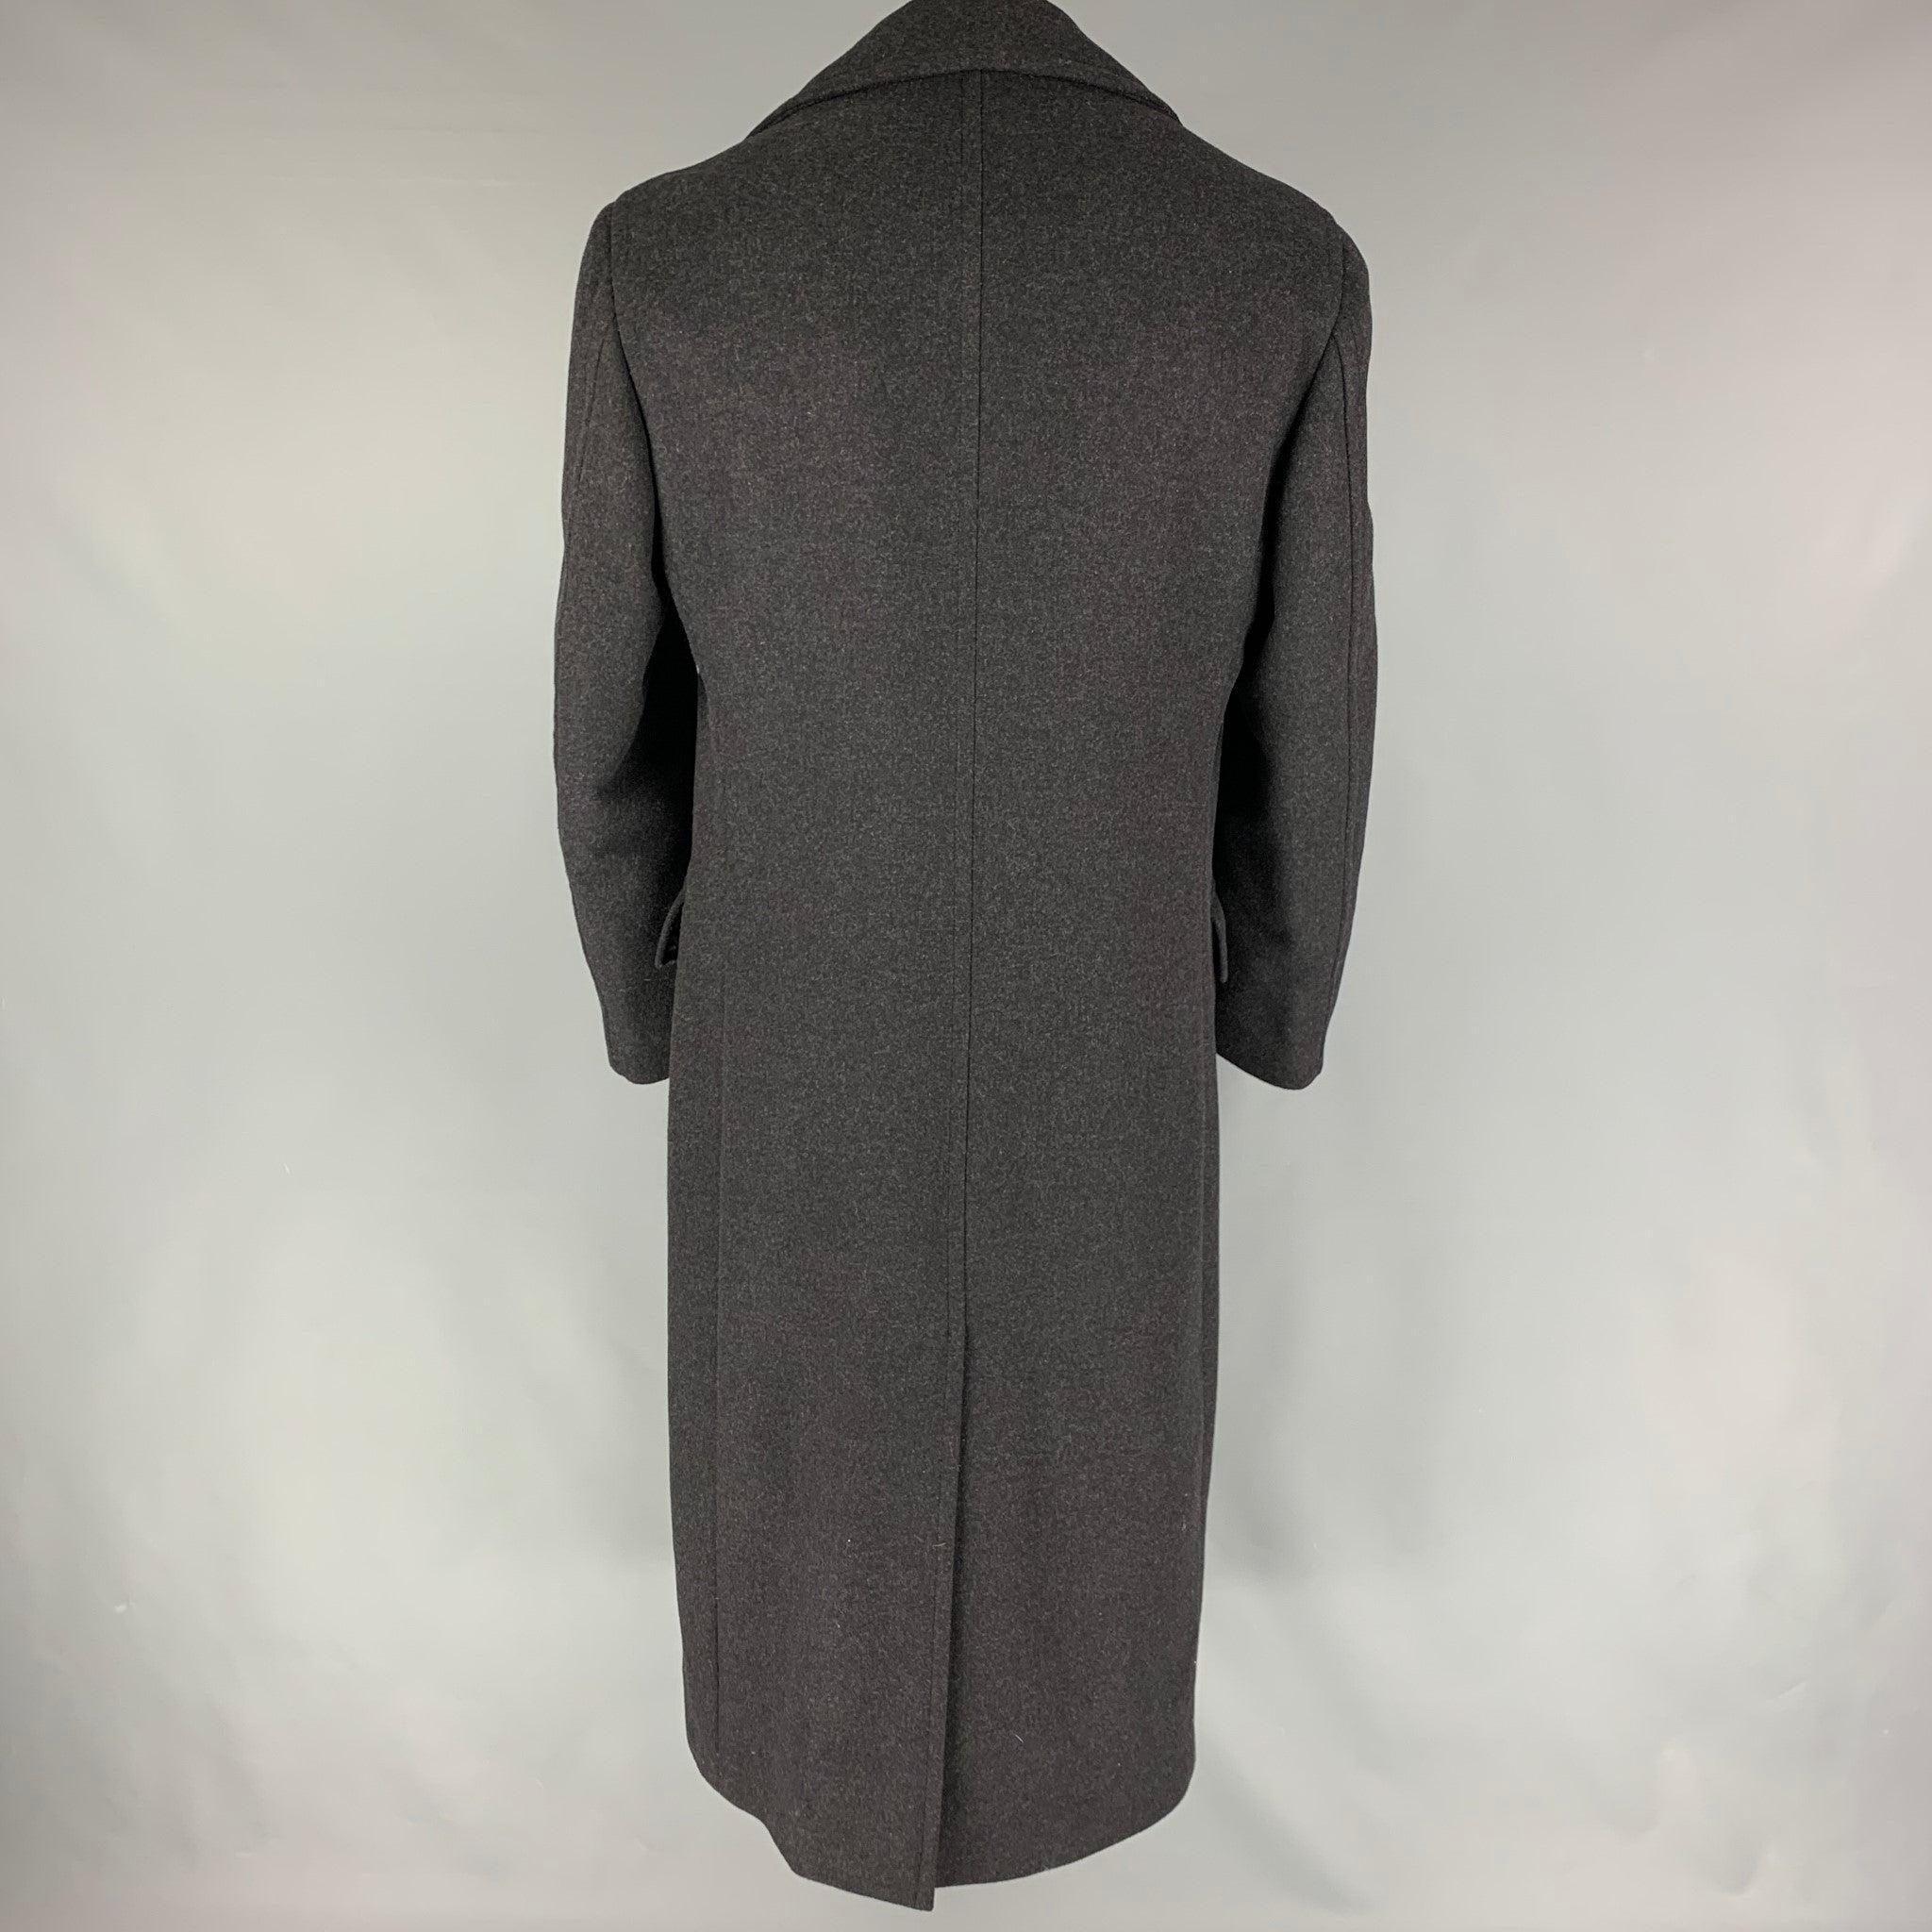 MICHAEL KORS Size 38 Charcoal Wool Blend Double Breasted Coat In Good Condition For Sale In San Francisco, CA